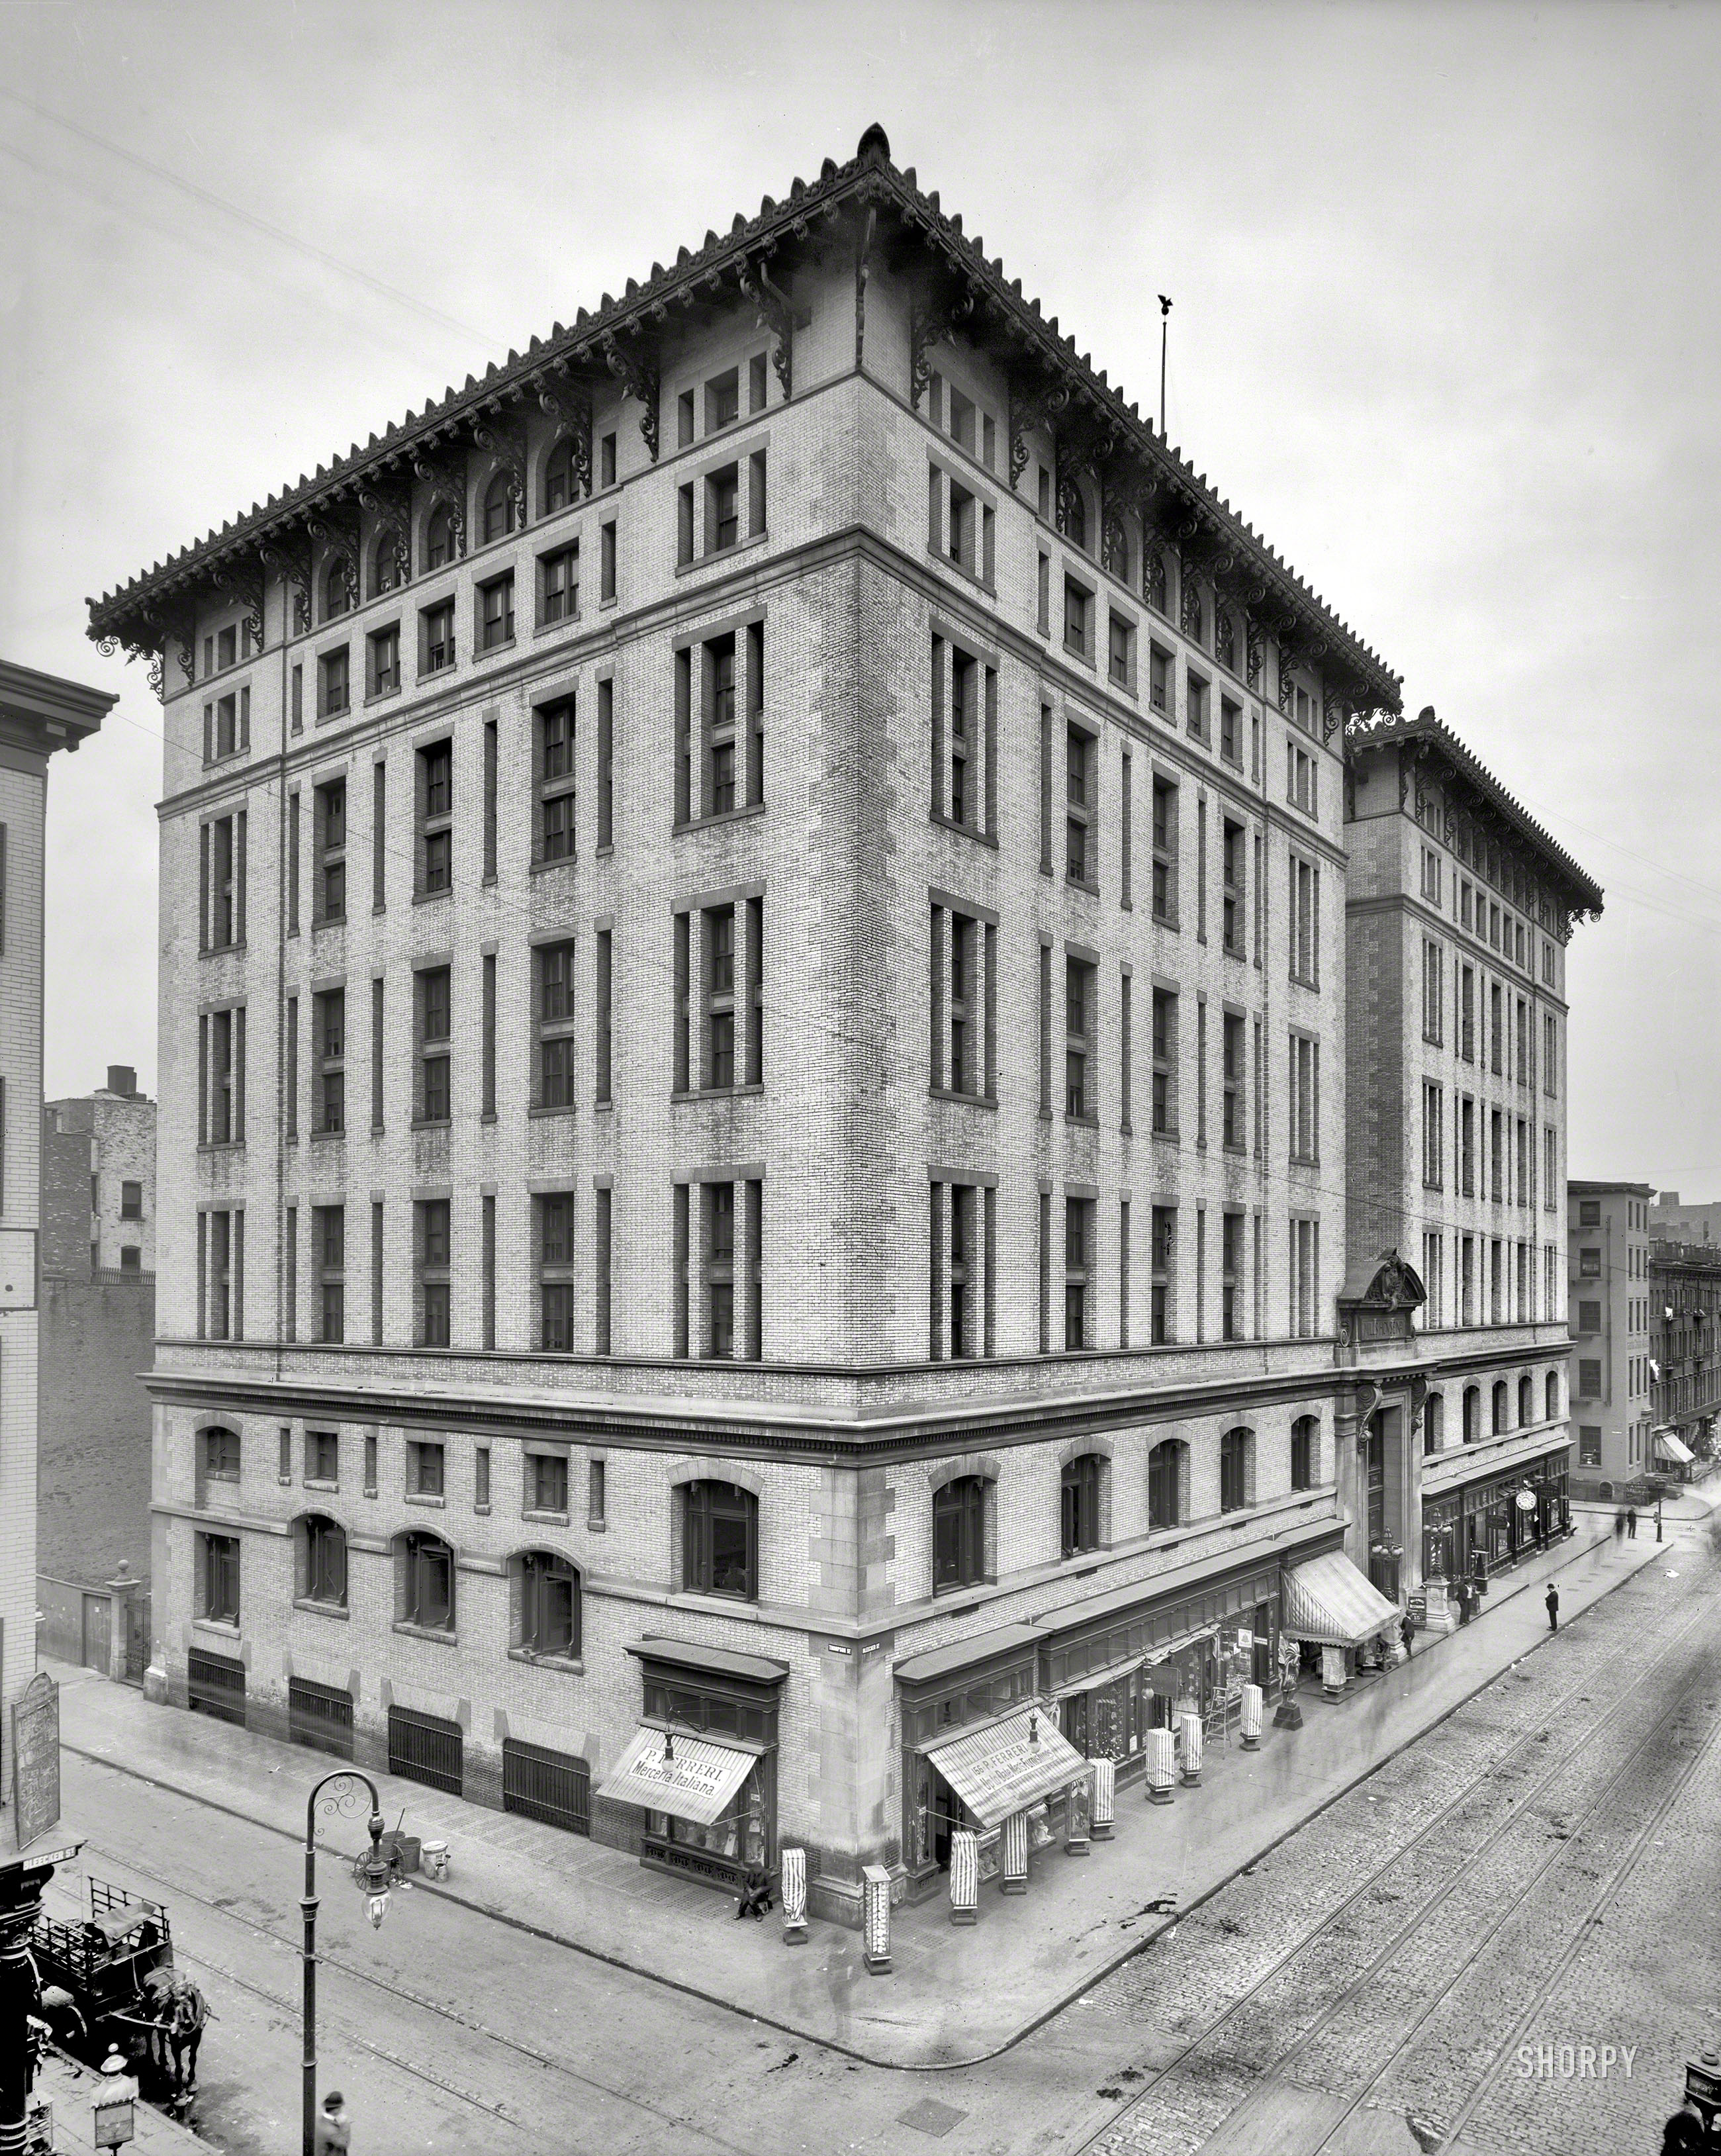 New York circa 1905. "Mills House No. 1, Thompson and Bleecker Sts." Designed as a "hostel for poor gentlemen," the building had 1,560 tiny rooms that rented for 20 cents a night. 8x10 glass negative, Detroit Publishing Co. View full size.